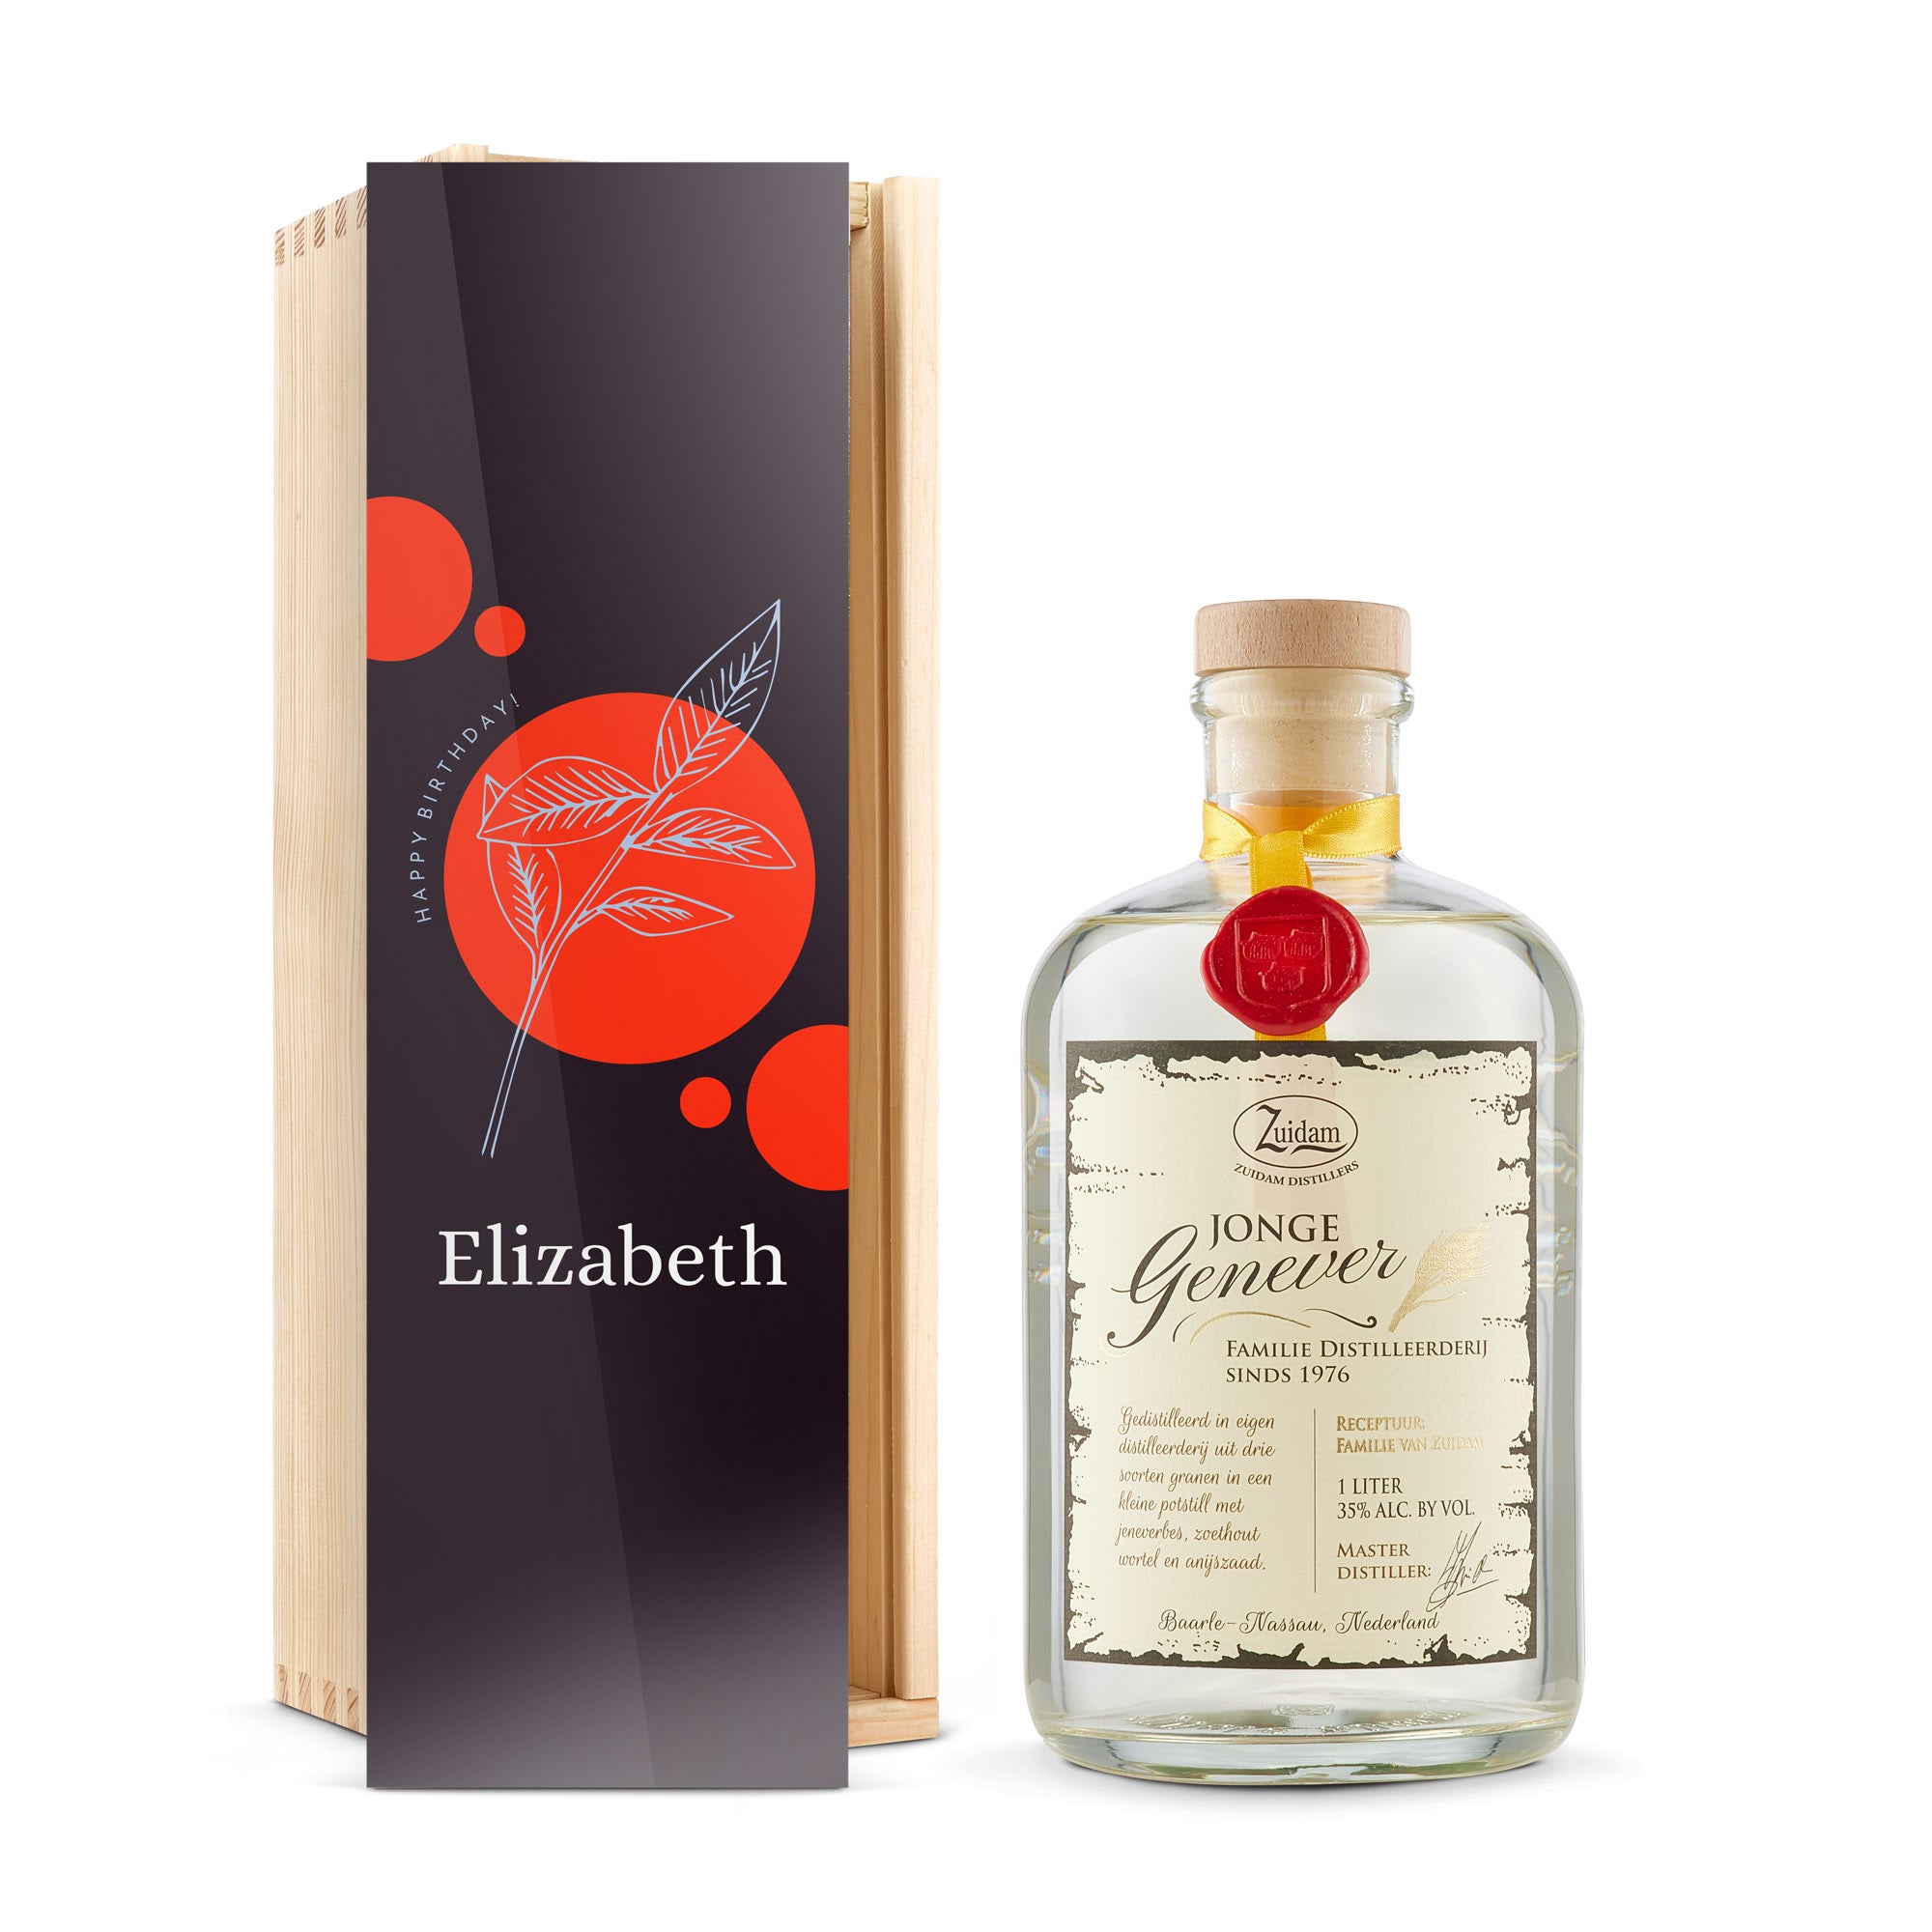 Personalised Dutch gin gift - Zuidam - Printed wooden case